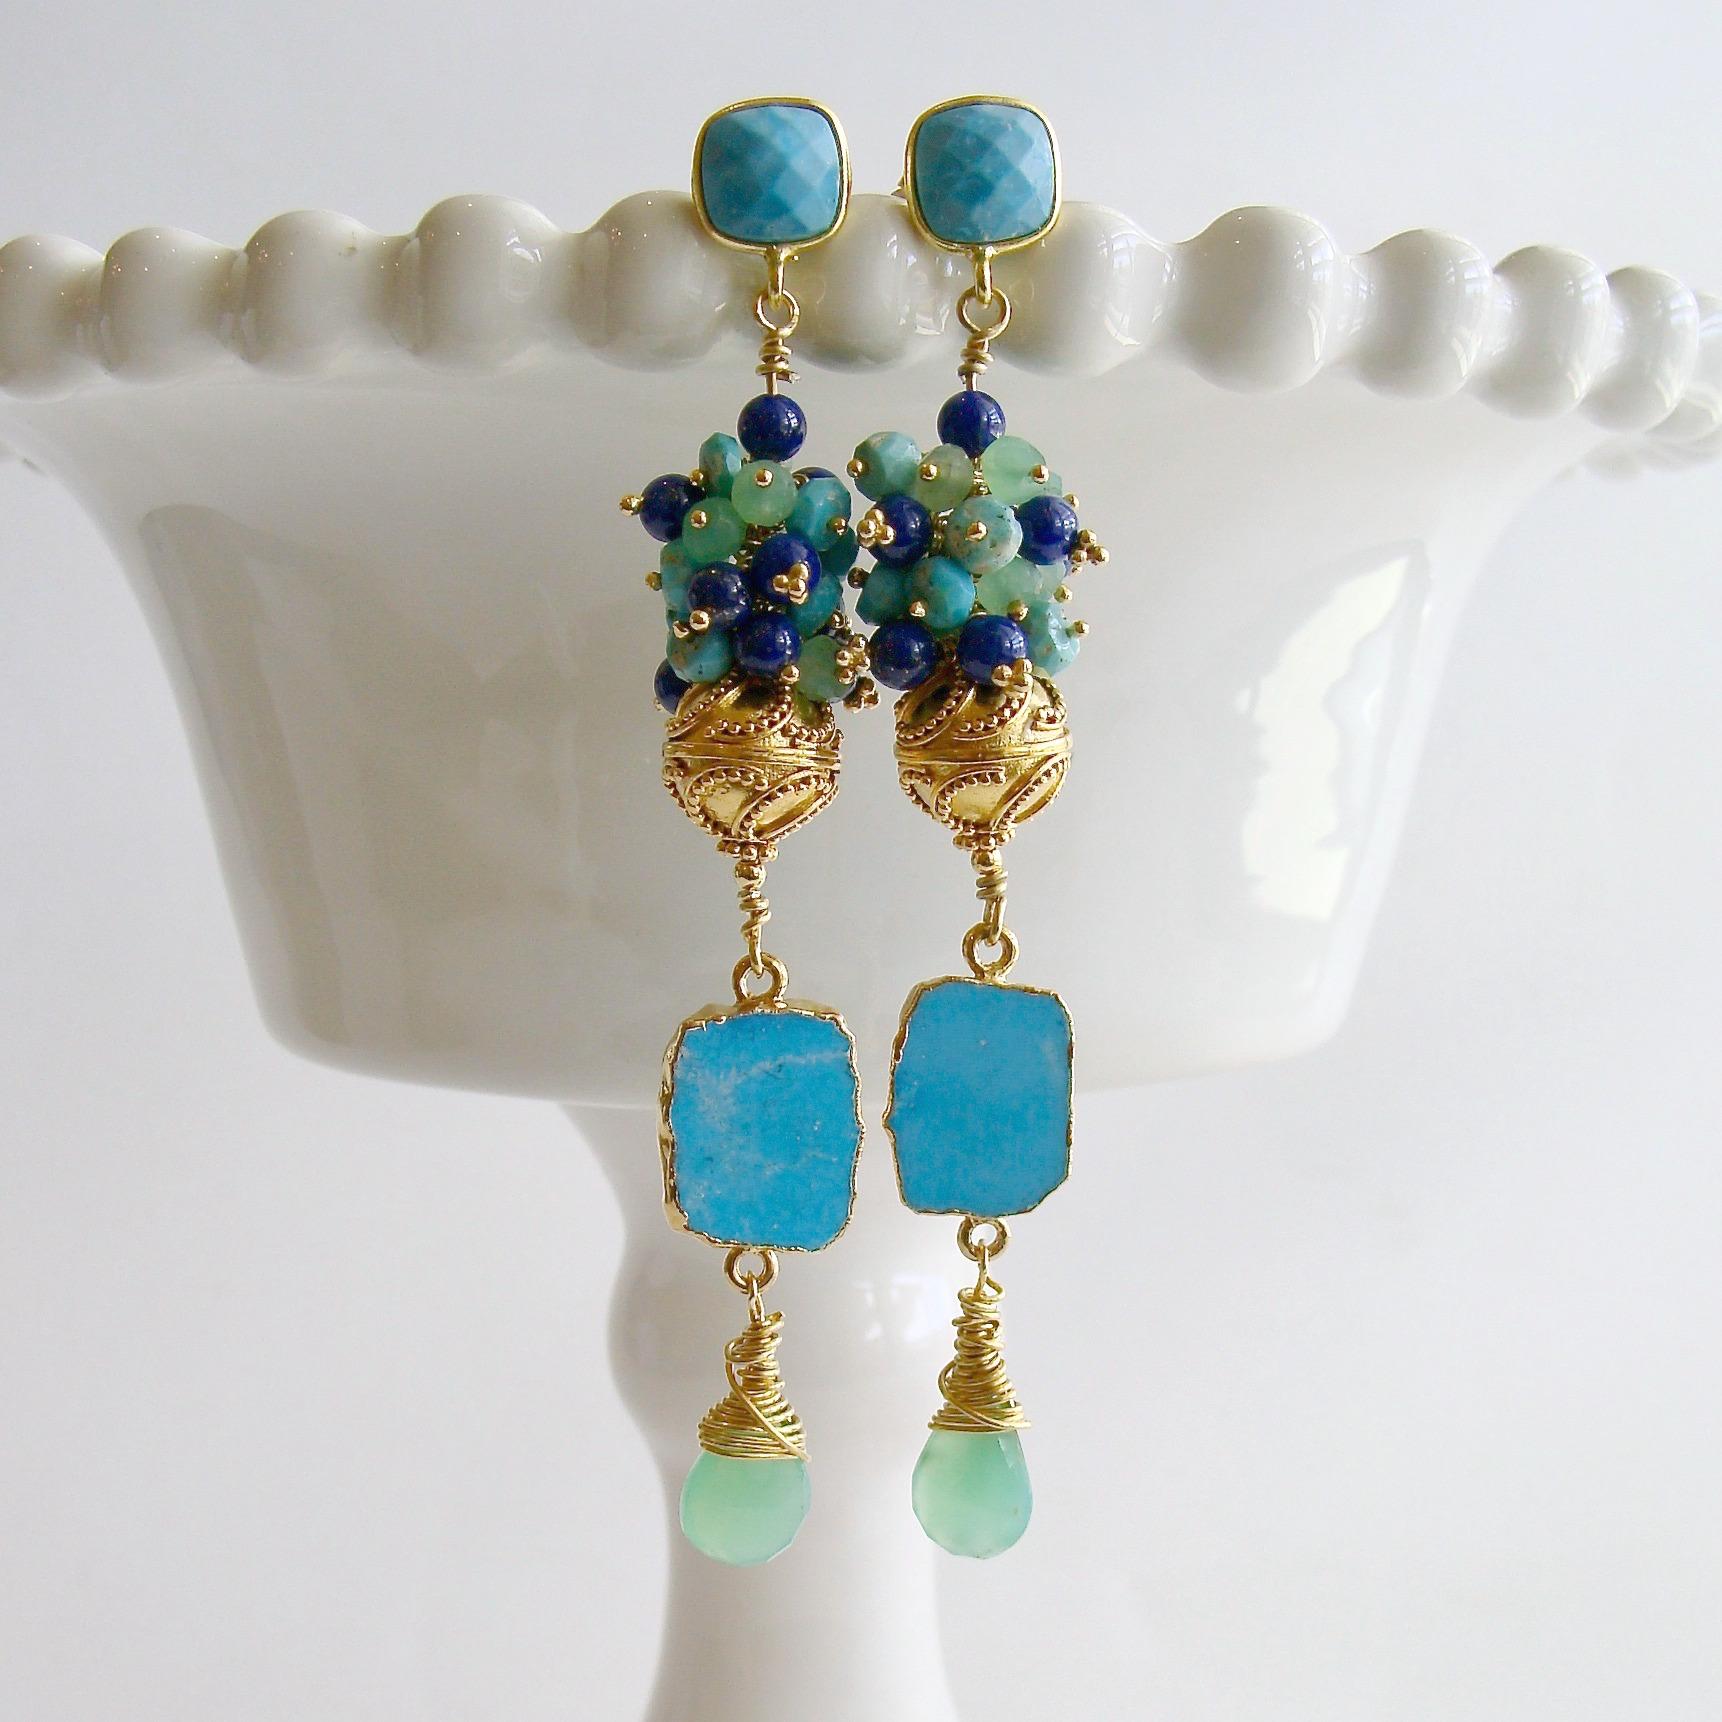 Morgaine II Duster Earrings.

A generous cluster of turquoise, spring green and royal blue rondelles consisting of Sleeping Beauty Turquoise, chrysoprase and lapis lazuli - crowns a swirled gold vermeil bead, while coveted Sleeping Beauty Turquoise